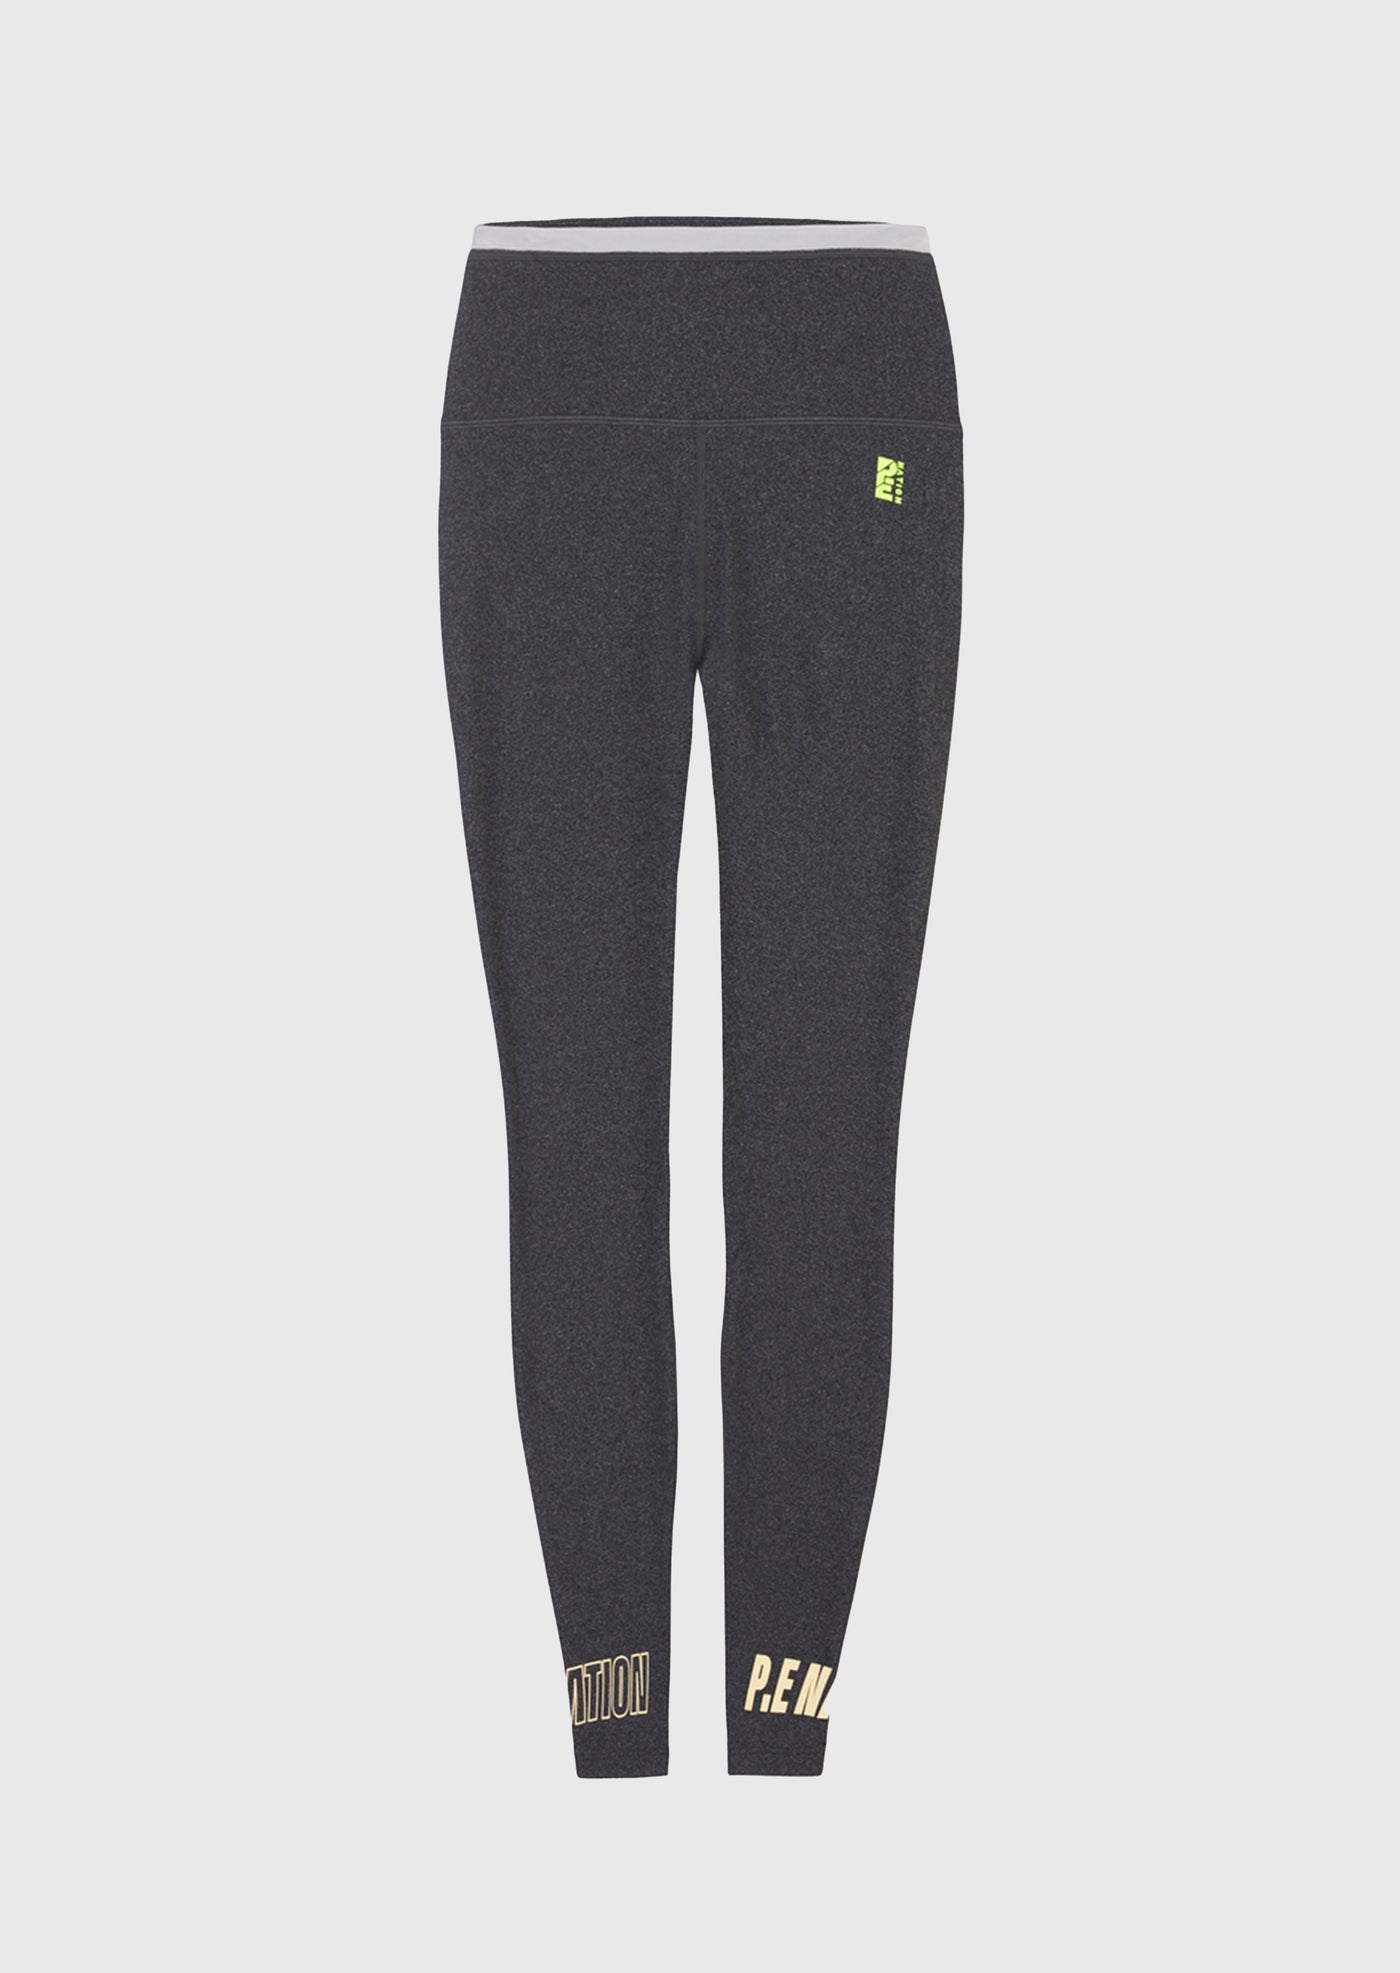 REACTION LEGGING IN CHARCOAL